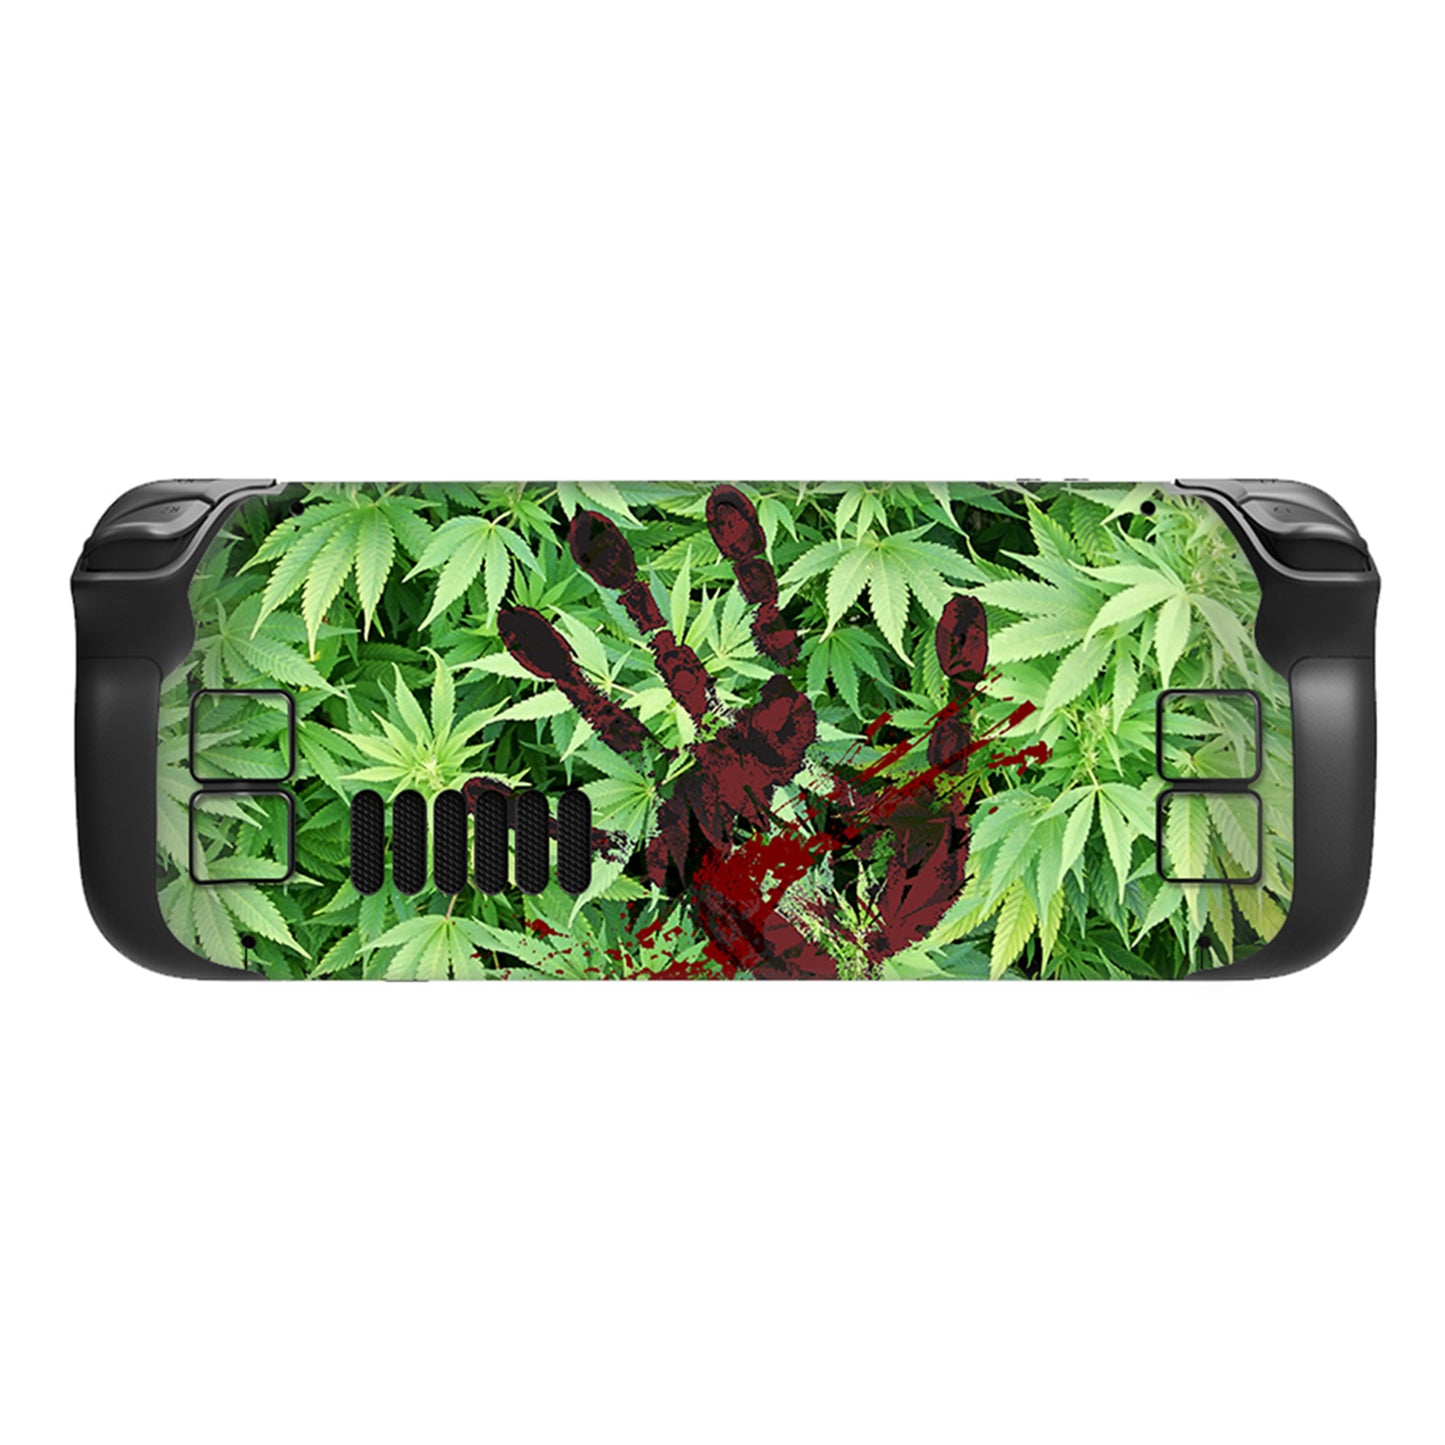 PlayVital Full Set Protective Skin Decal for Steam Deck, Custom Stickers Vinyl Cover for Steam Deck Handheld Gaming PC - Blood Handprint Weeds - SDTM003 playvital